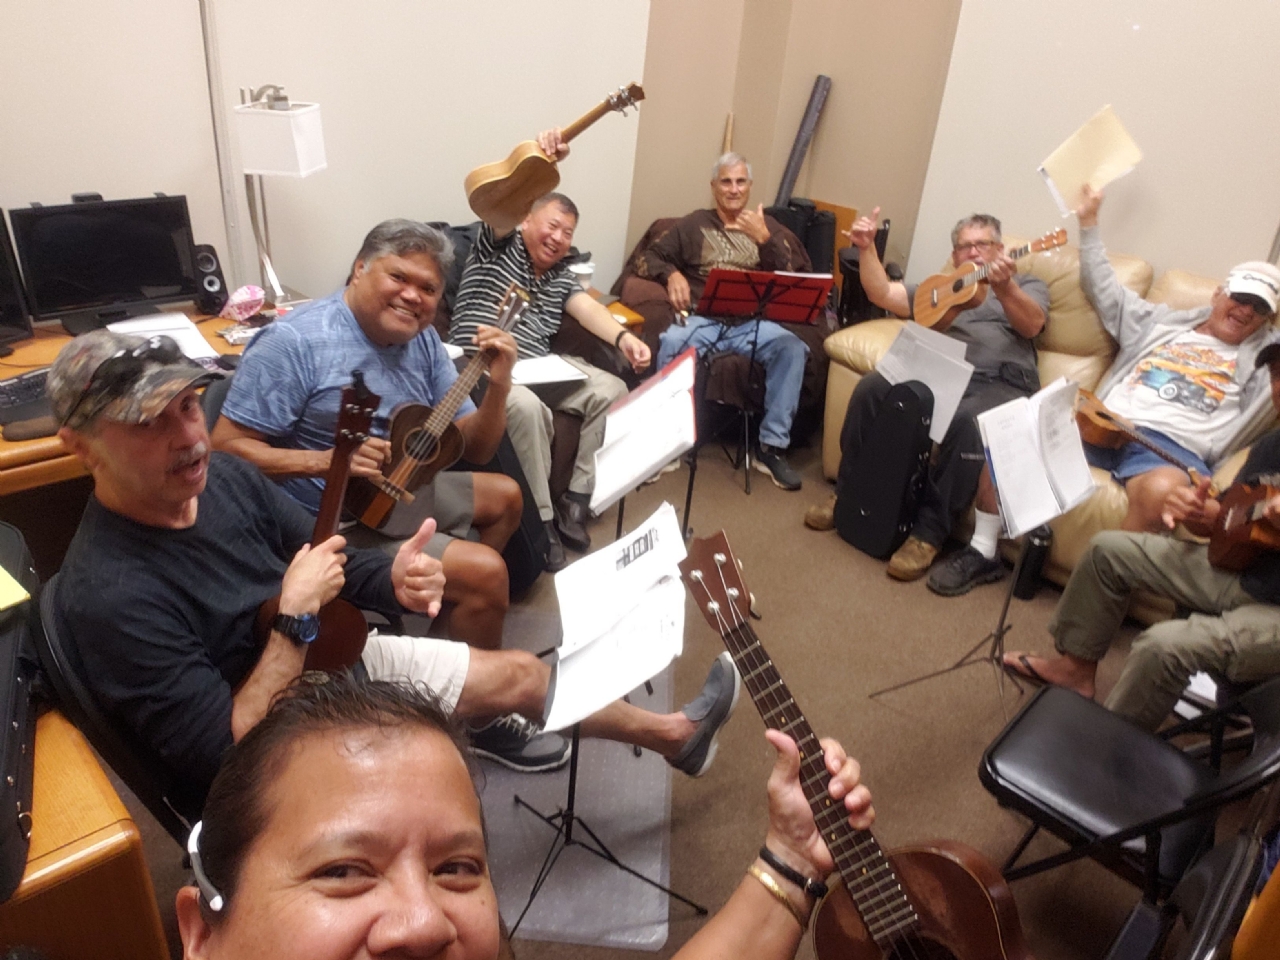 Veterans Brothers & Sisters sharing a common hobby of playing ukulele at the West O'ahu Vet Center in Kapolei.  You'll see quite a few of the 10276 Members in this group.  Mahalo to our Ukulele Kumu (Teacher), Clarence Kanae.